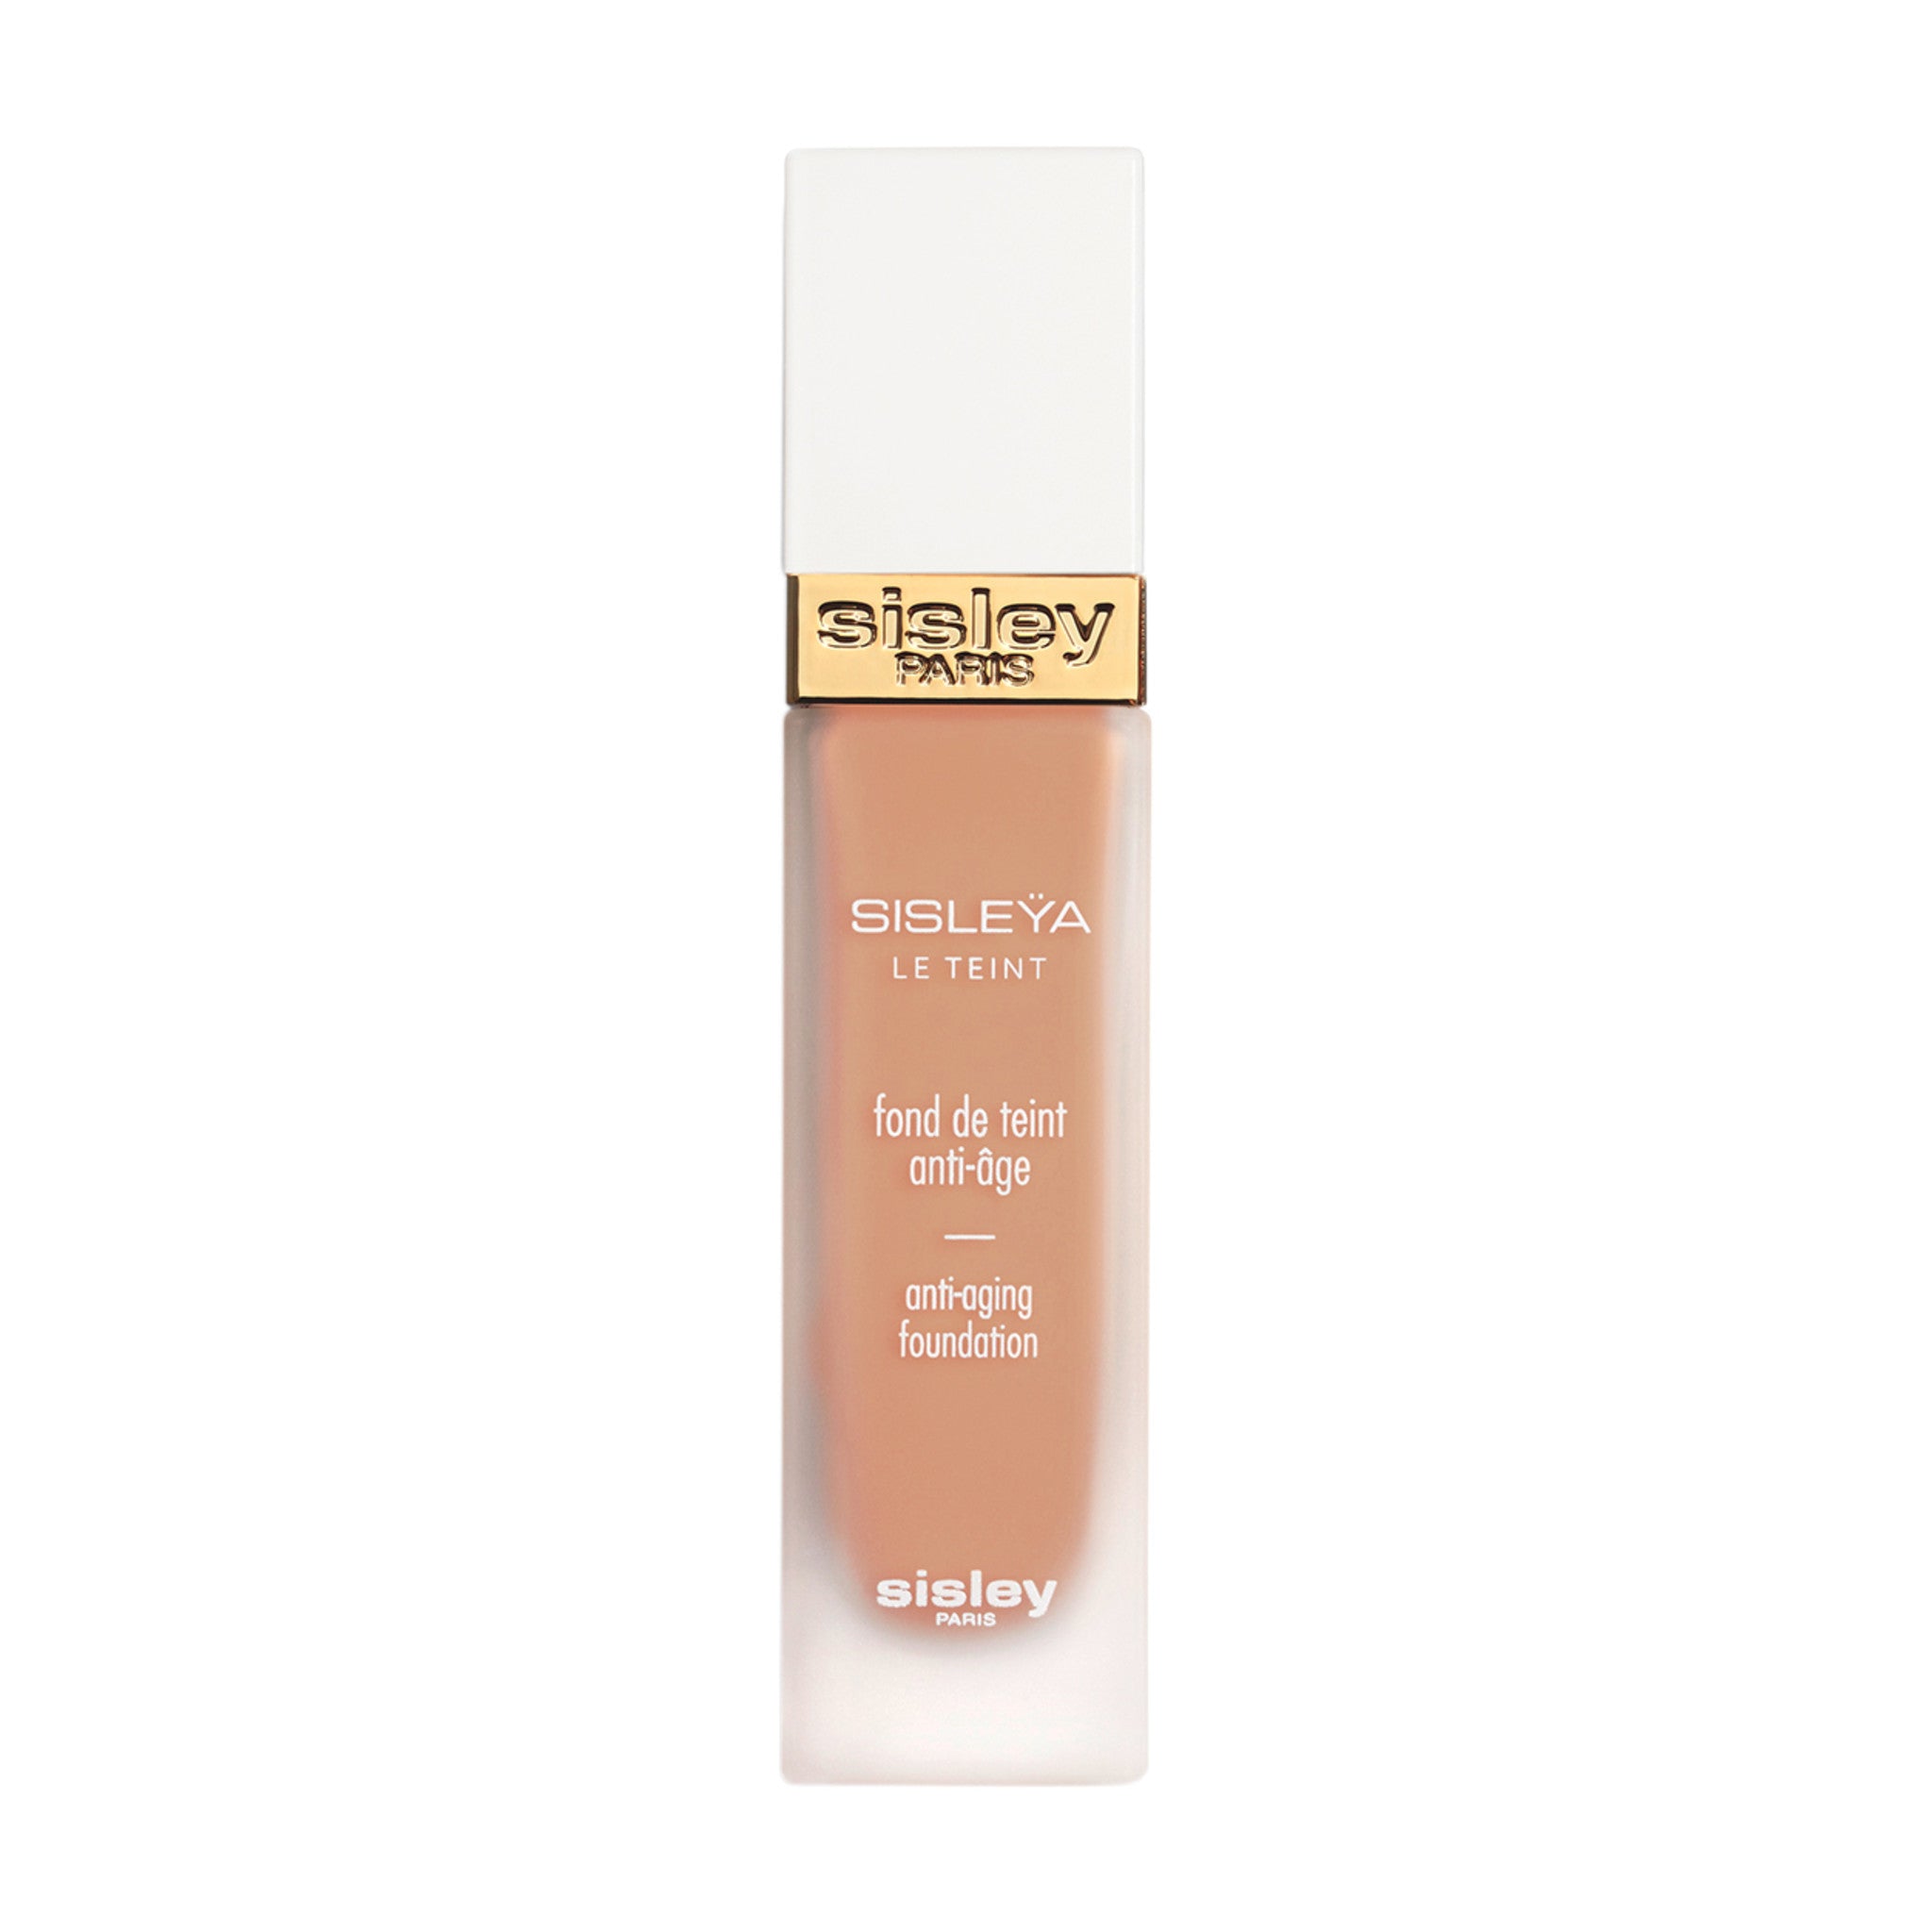 Sisley-Paris Sisleÿa Le Teint Foundation Color/Shade variant: 3R+ Pinky Peach main image. This product is for medium complexions